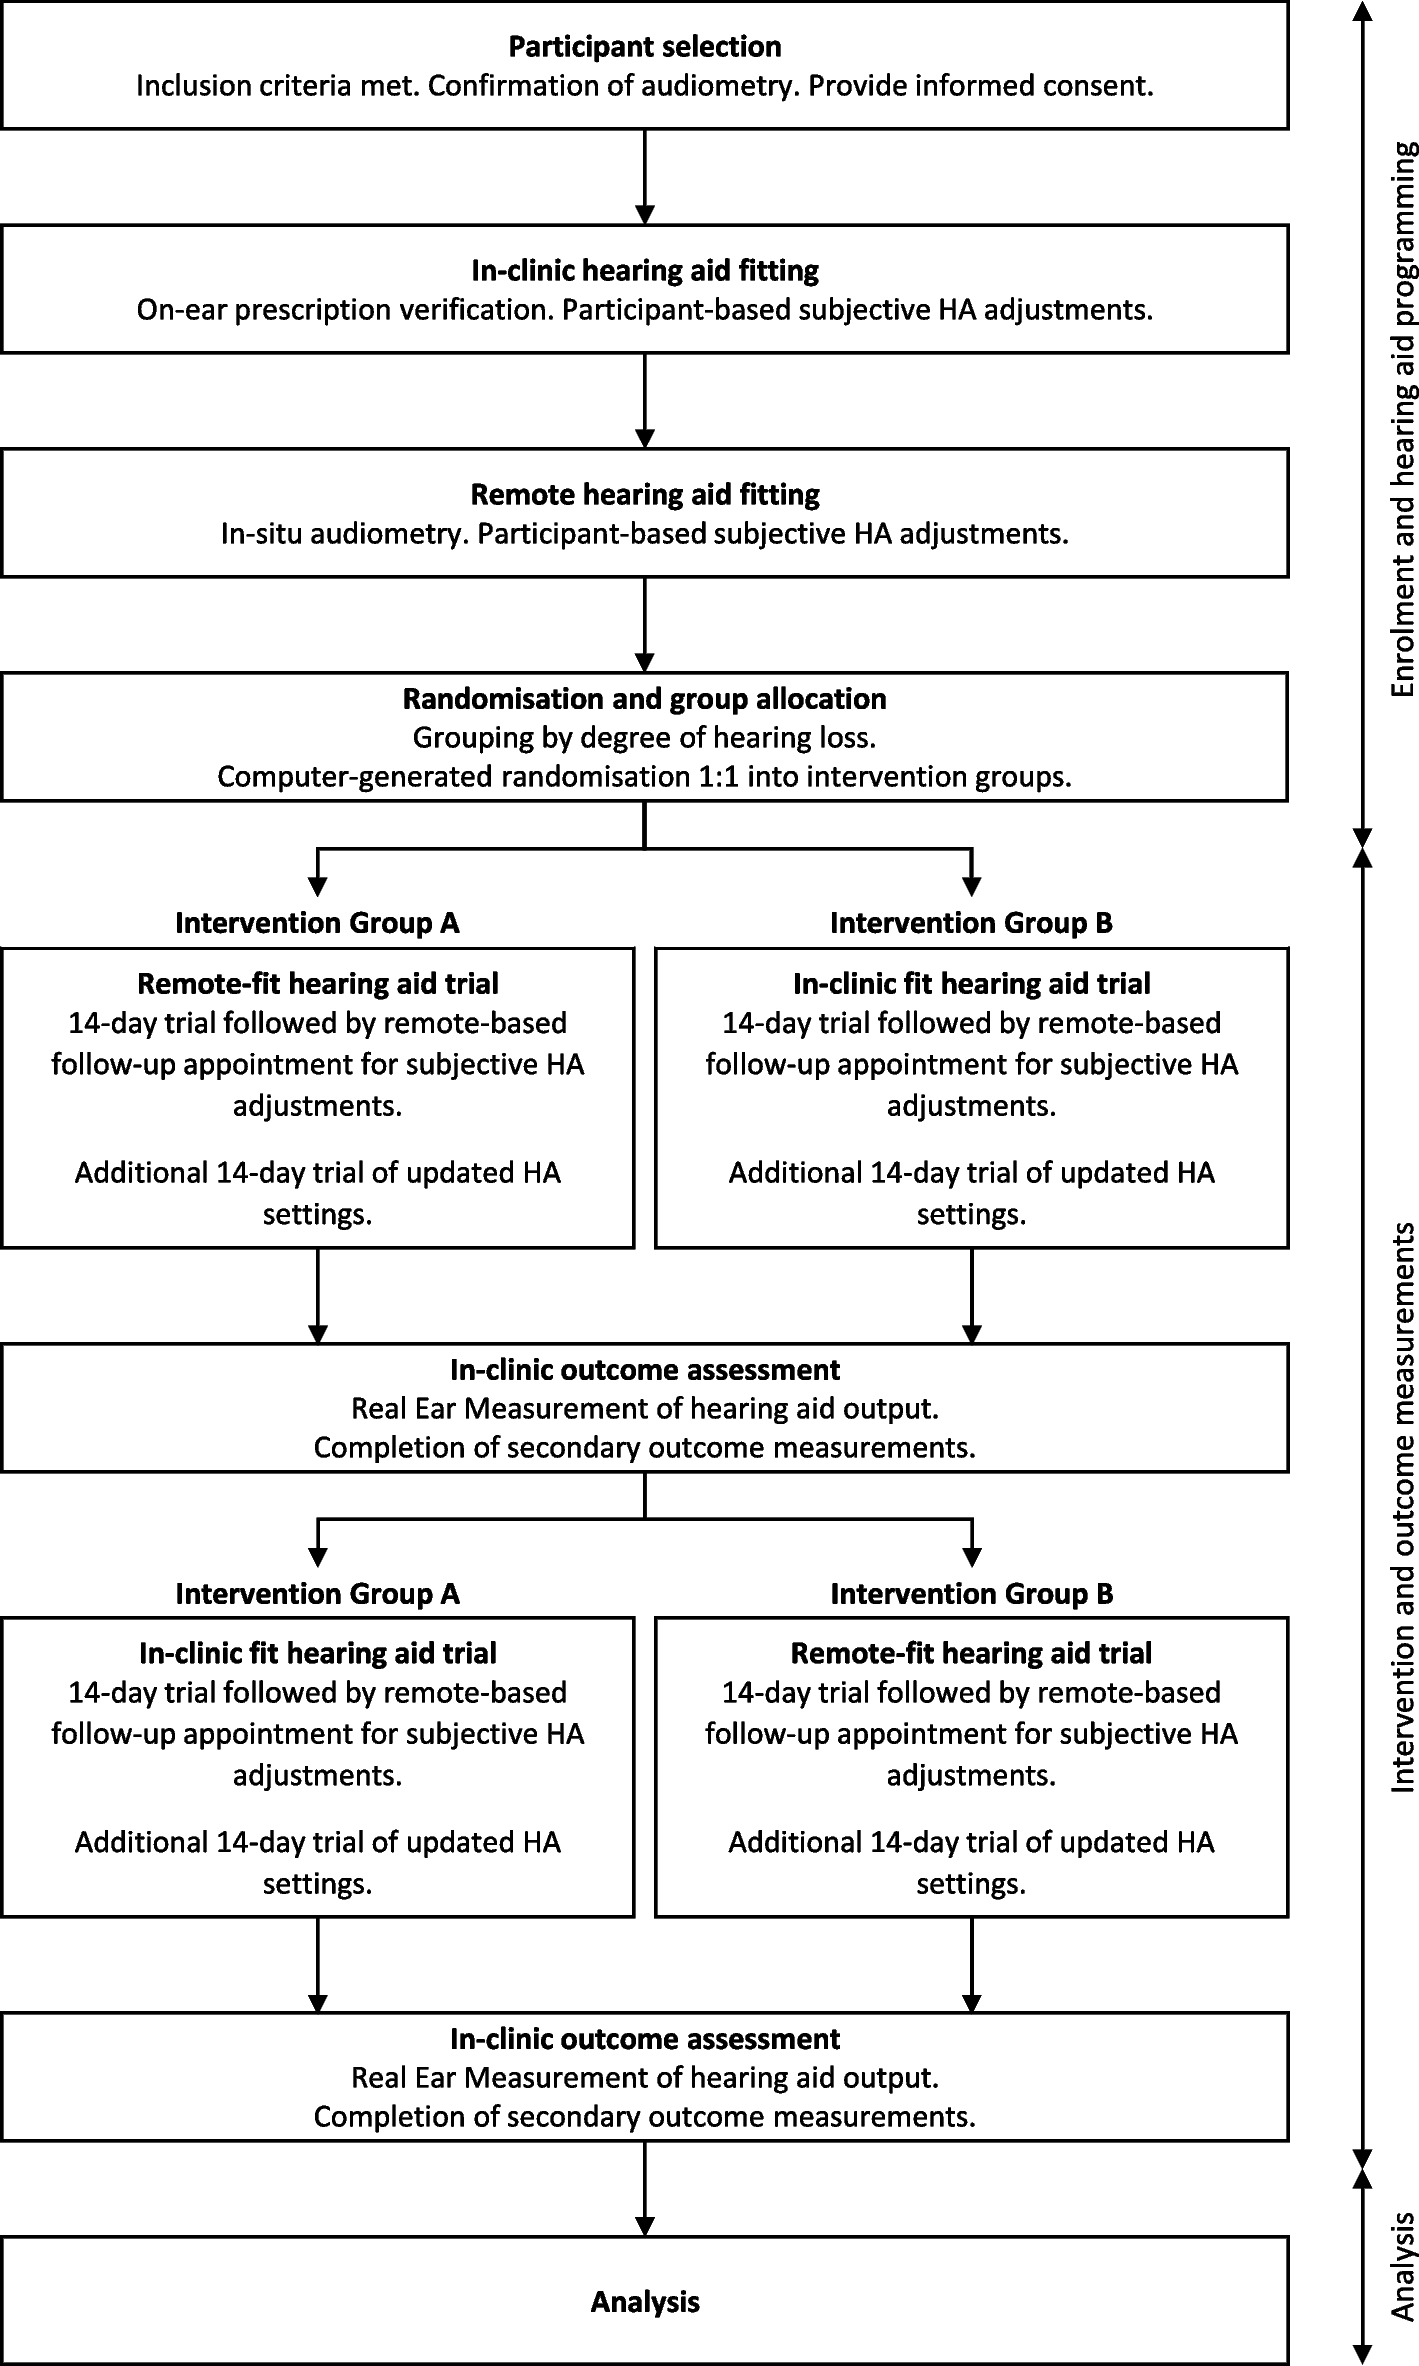 Remote or in-clinic? The effect of service delivery mode on hearing aid output: study protocol for a double-blinded, randomised trial in adults with mild to moderate sensorineural hearing loss